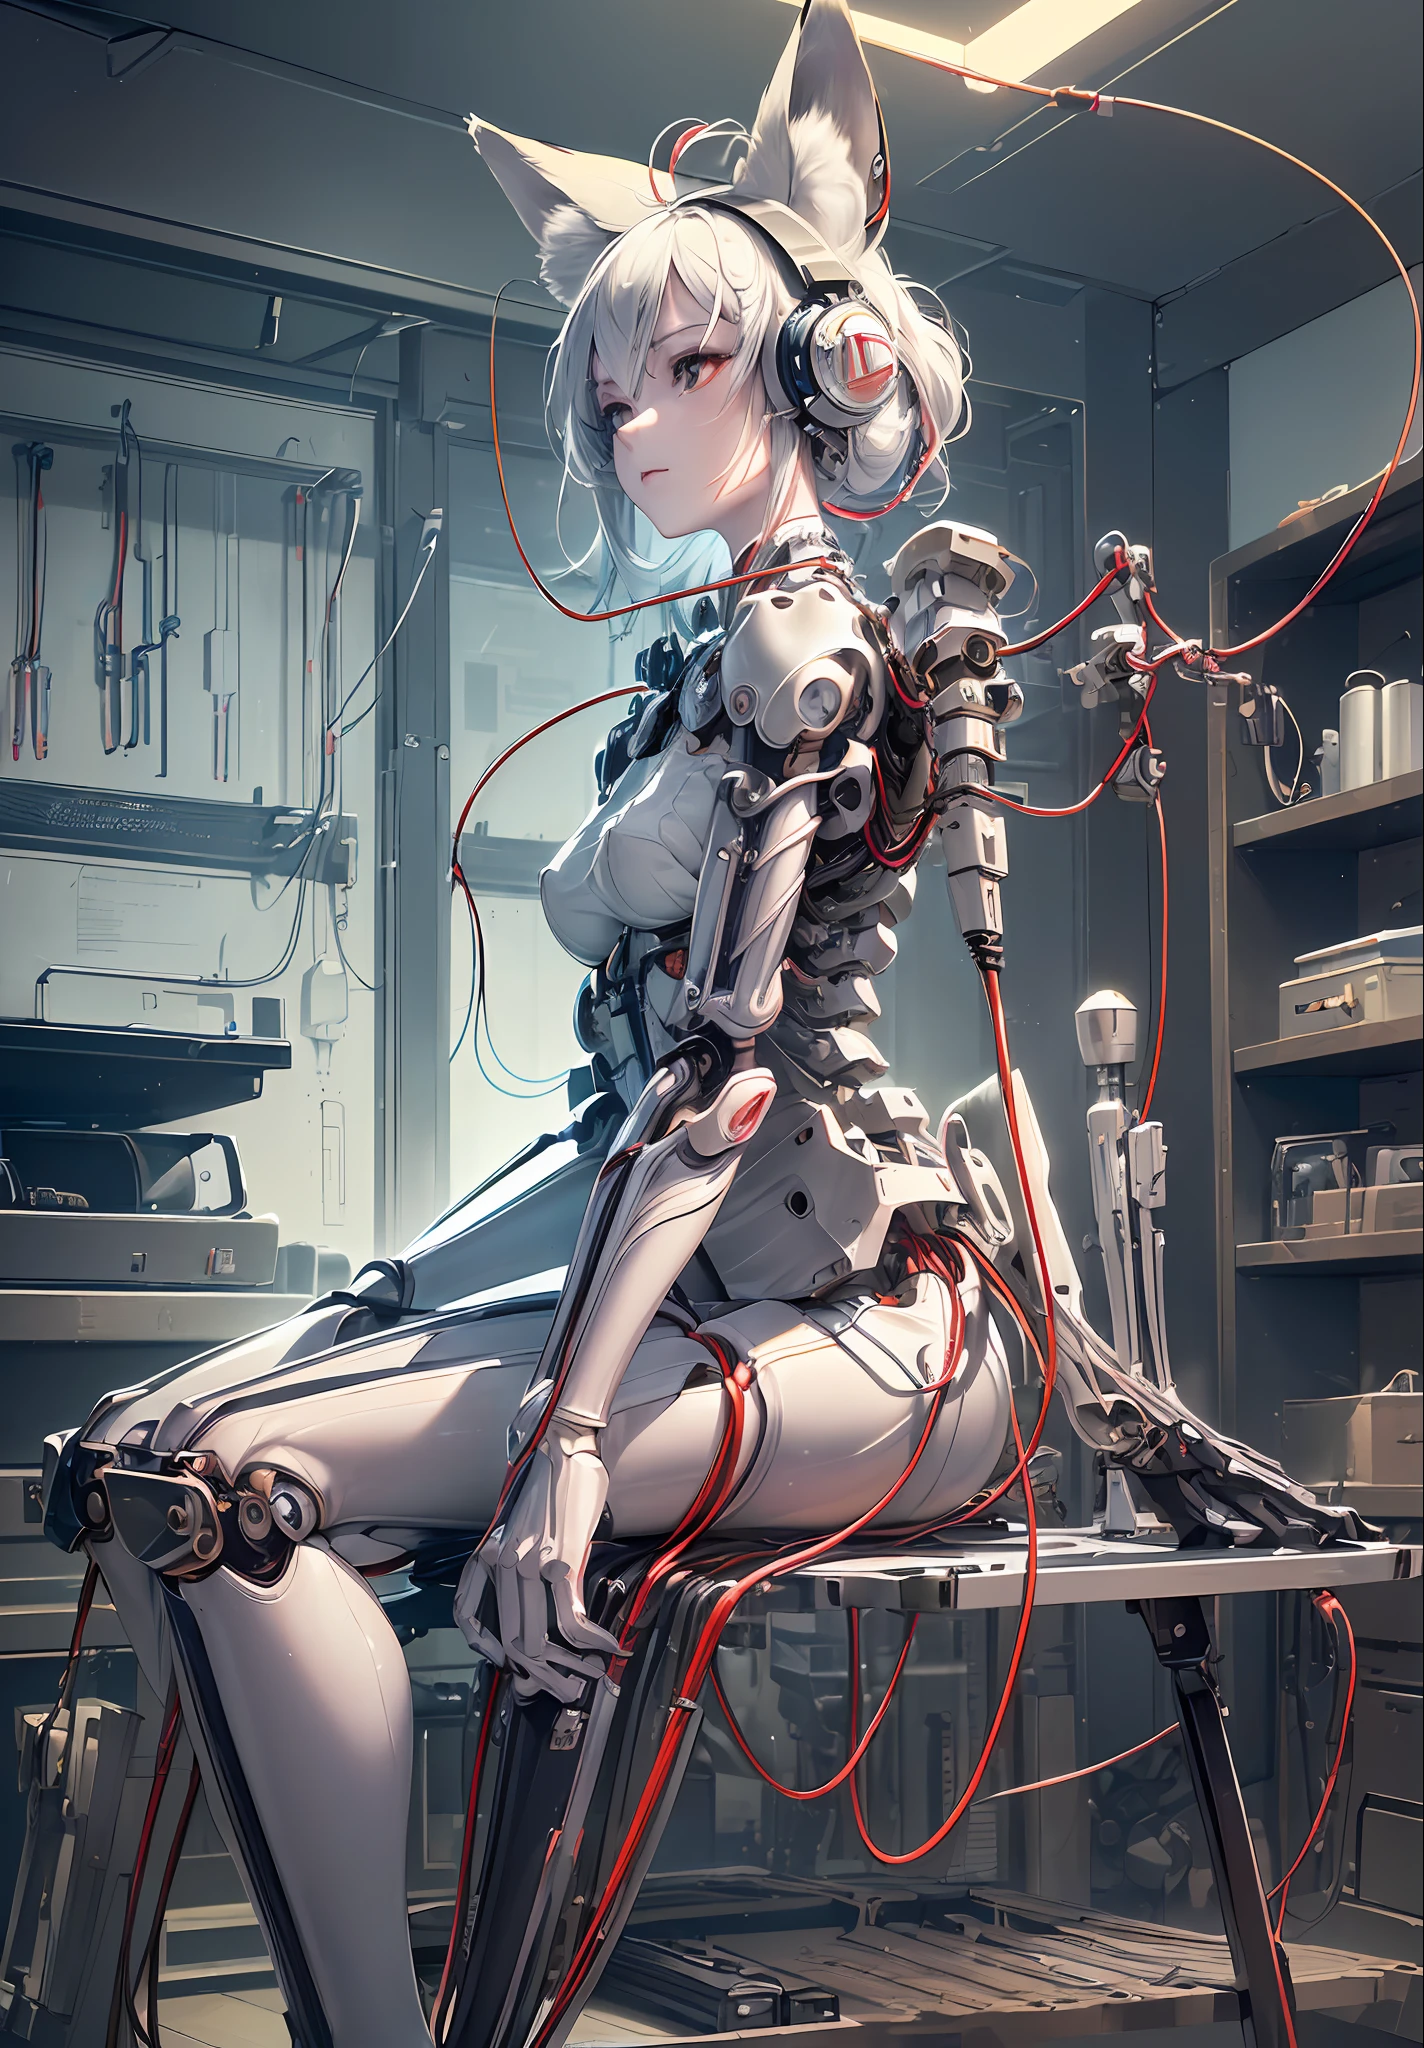 (((Masterpiece)))), (((highest quality)))), ((Ultra Definition)), (High Definition CG Illustration), (((Very delicate and beautiful)), (from the side), Cinematic light, (((1 Mechanical Fox Ear Girl)), Solo, Full Body, (Mechanical Joint: 1.2), ((Mechanical Limbs)), (Blood Vessels Connected to Tubes), (Mechanical Spine Attached to the Back), (Mechanical Cervical Vertebrae Attached to the Neck)), (Sitting), Expressionless, (Wires and cables attached to the neck: 1.2), (Wires and cables on the head: 1.2) (Character Focused), Science Fiction, Highly Detailed, Colorful, Most Detailed